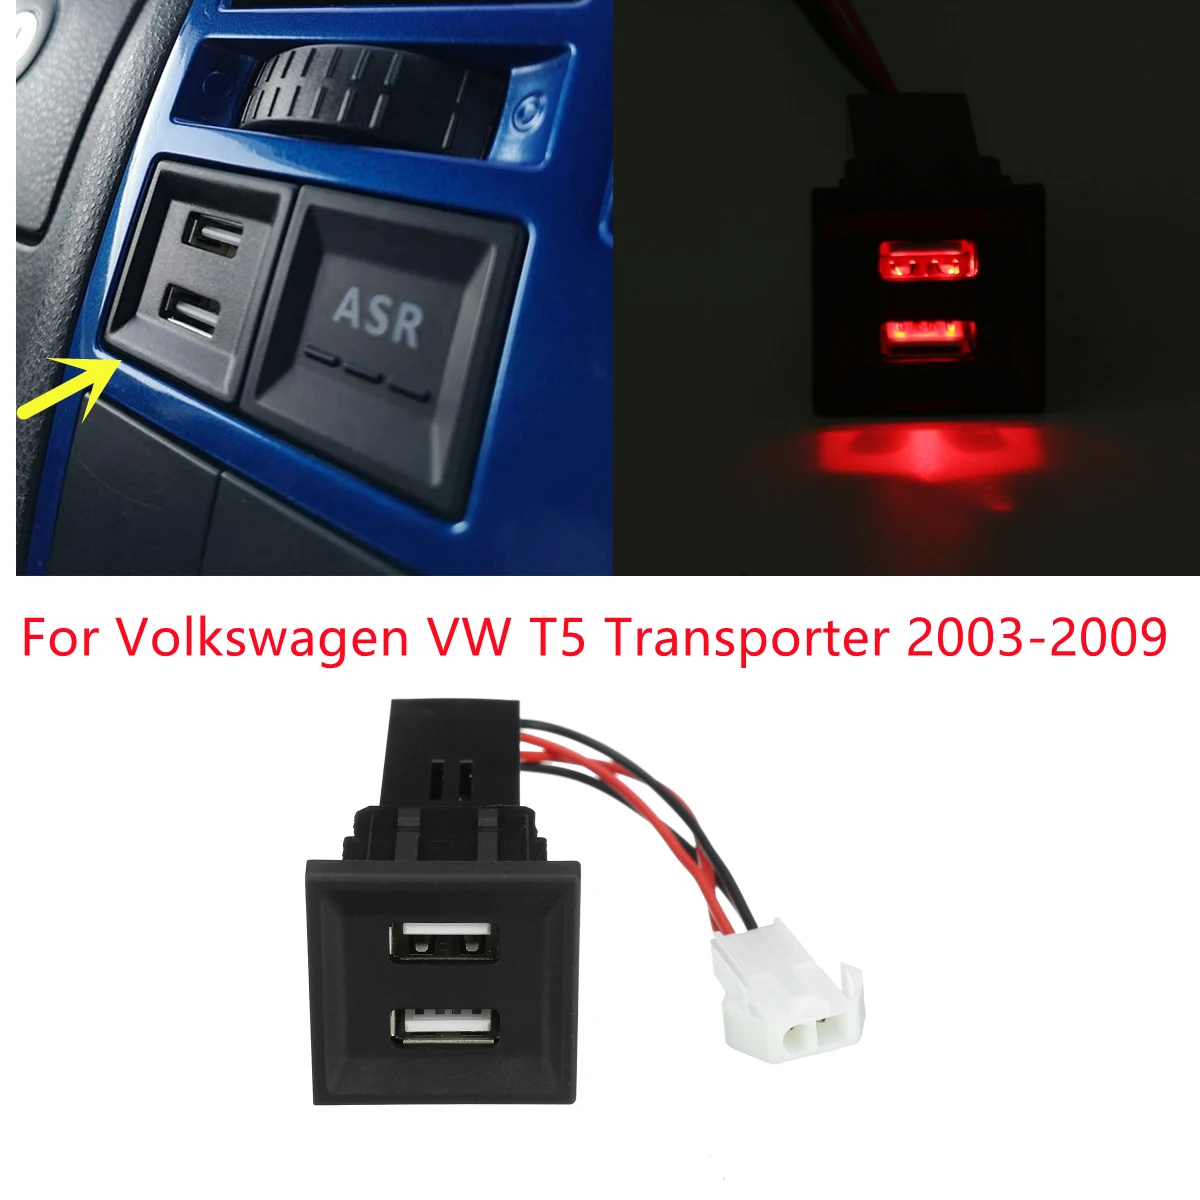 Dual USB Phone Charger Ports for VW/Volkswagen T5 - Flat Blank